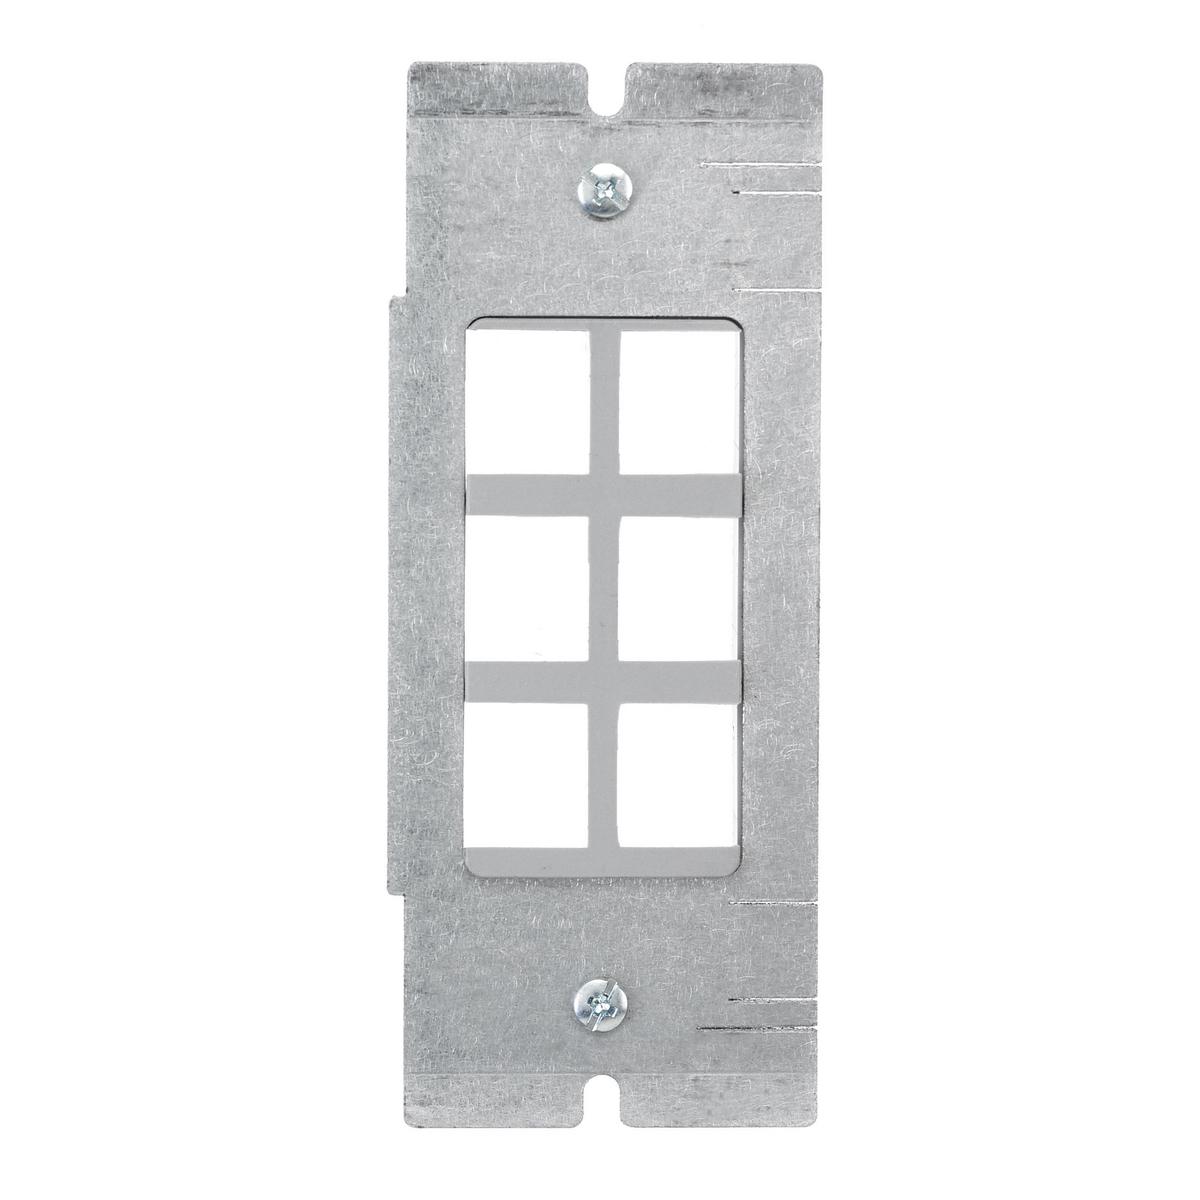 Hubbell FBMP6KS Concrete, Access, Wood Floorboxes, Recessed, 2, 4, & 6-Gang Series, Mounting Plate, 1-Gang, (1) StyleLine/Decorator Opening Including Hubbell ISF6GY 6-Port Frame  ; Plate for Use in SystemOne 2, 4 & 6-Gang Recessed Floorboxes ; 1-Gang- StyleLine/Decorator